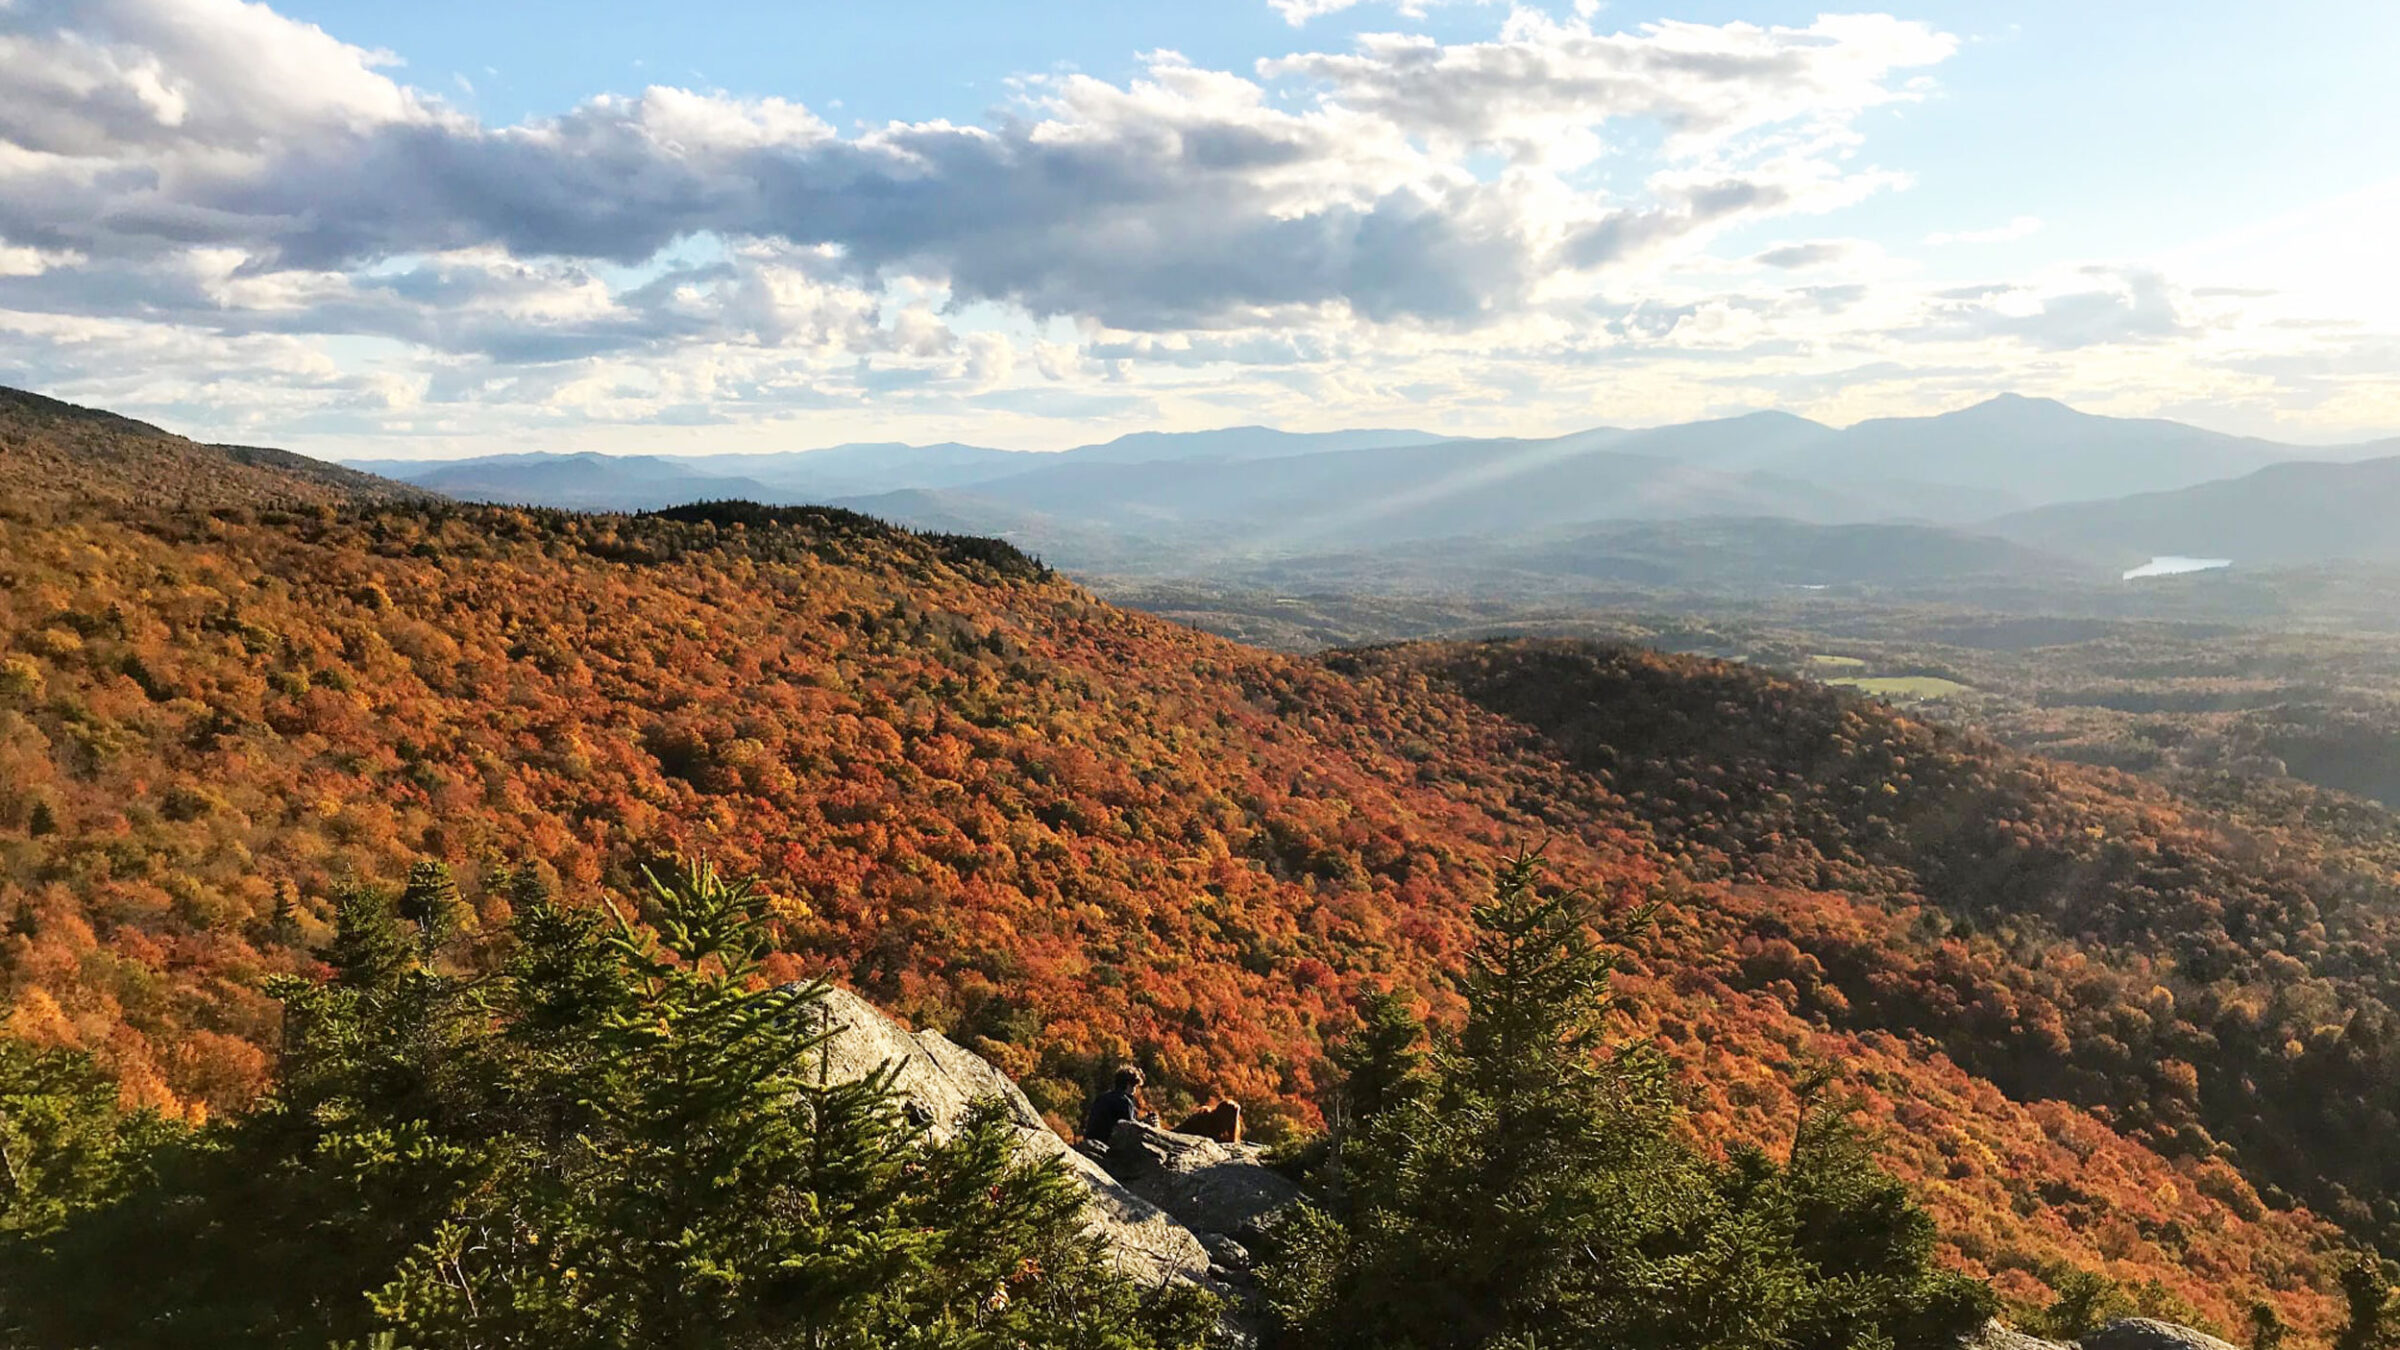 View of fall foliage from the top of a mountain in Vermont.